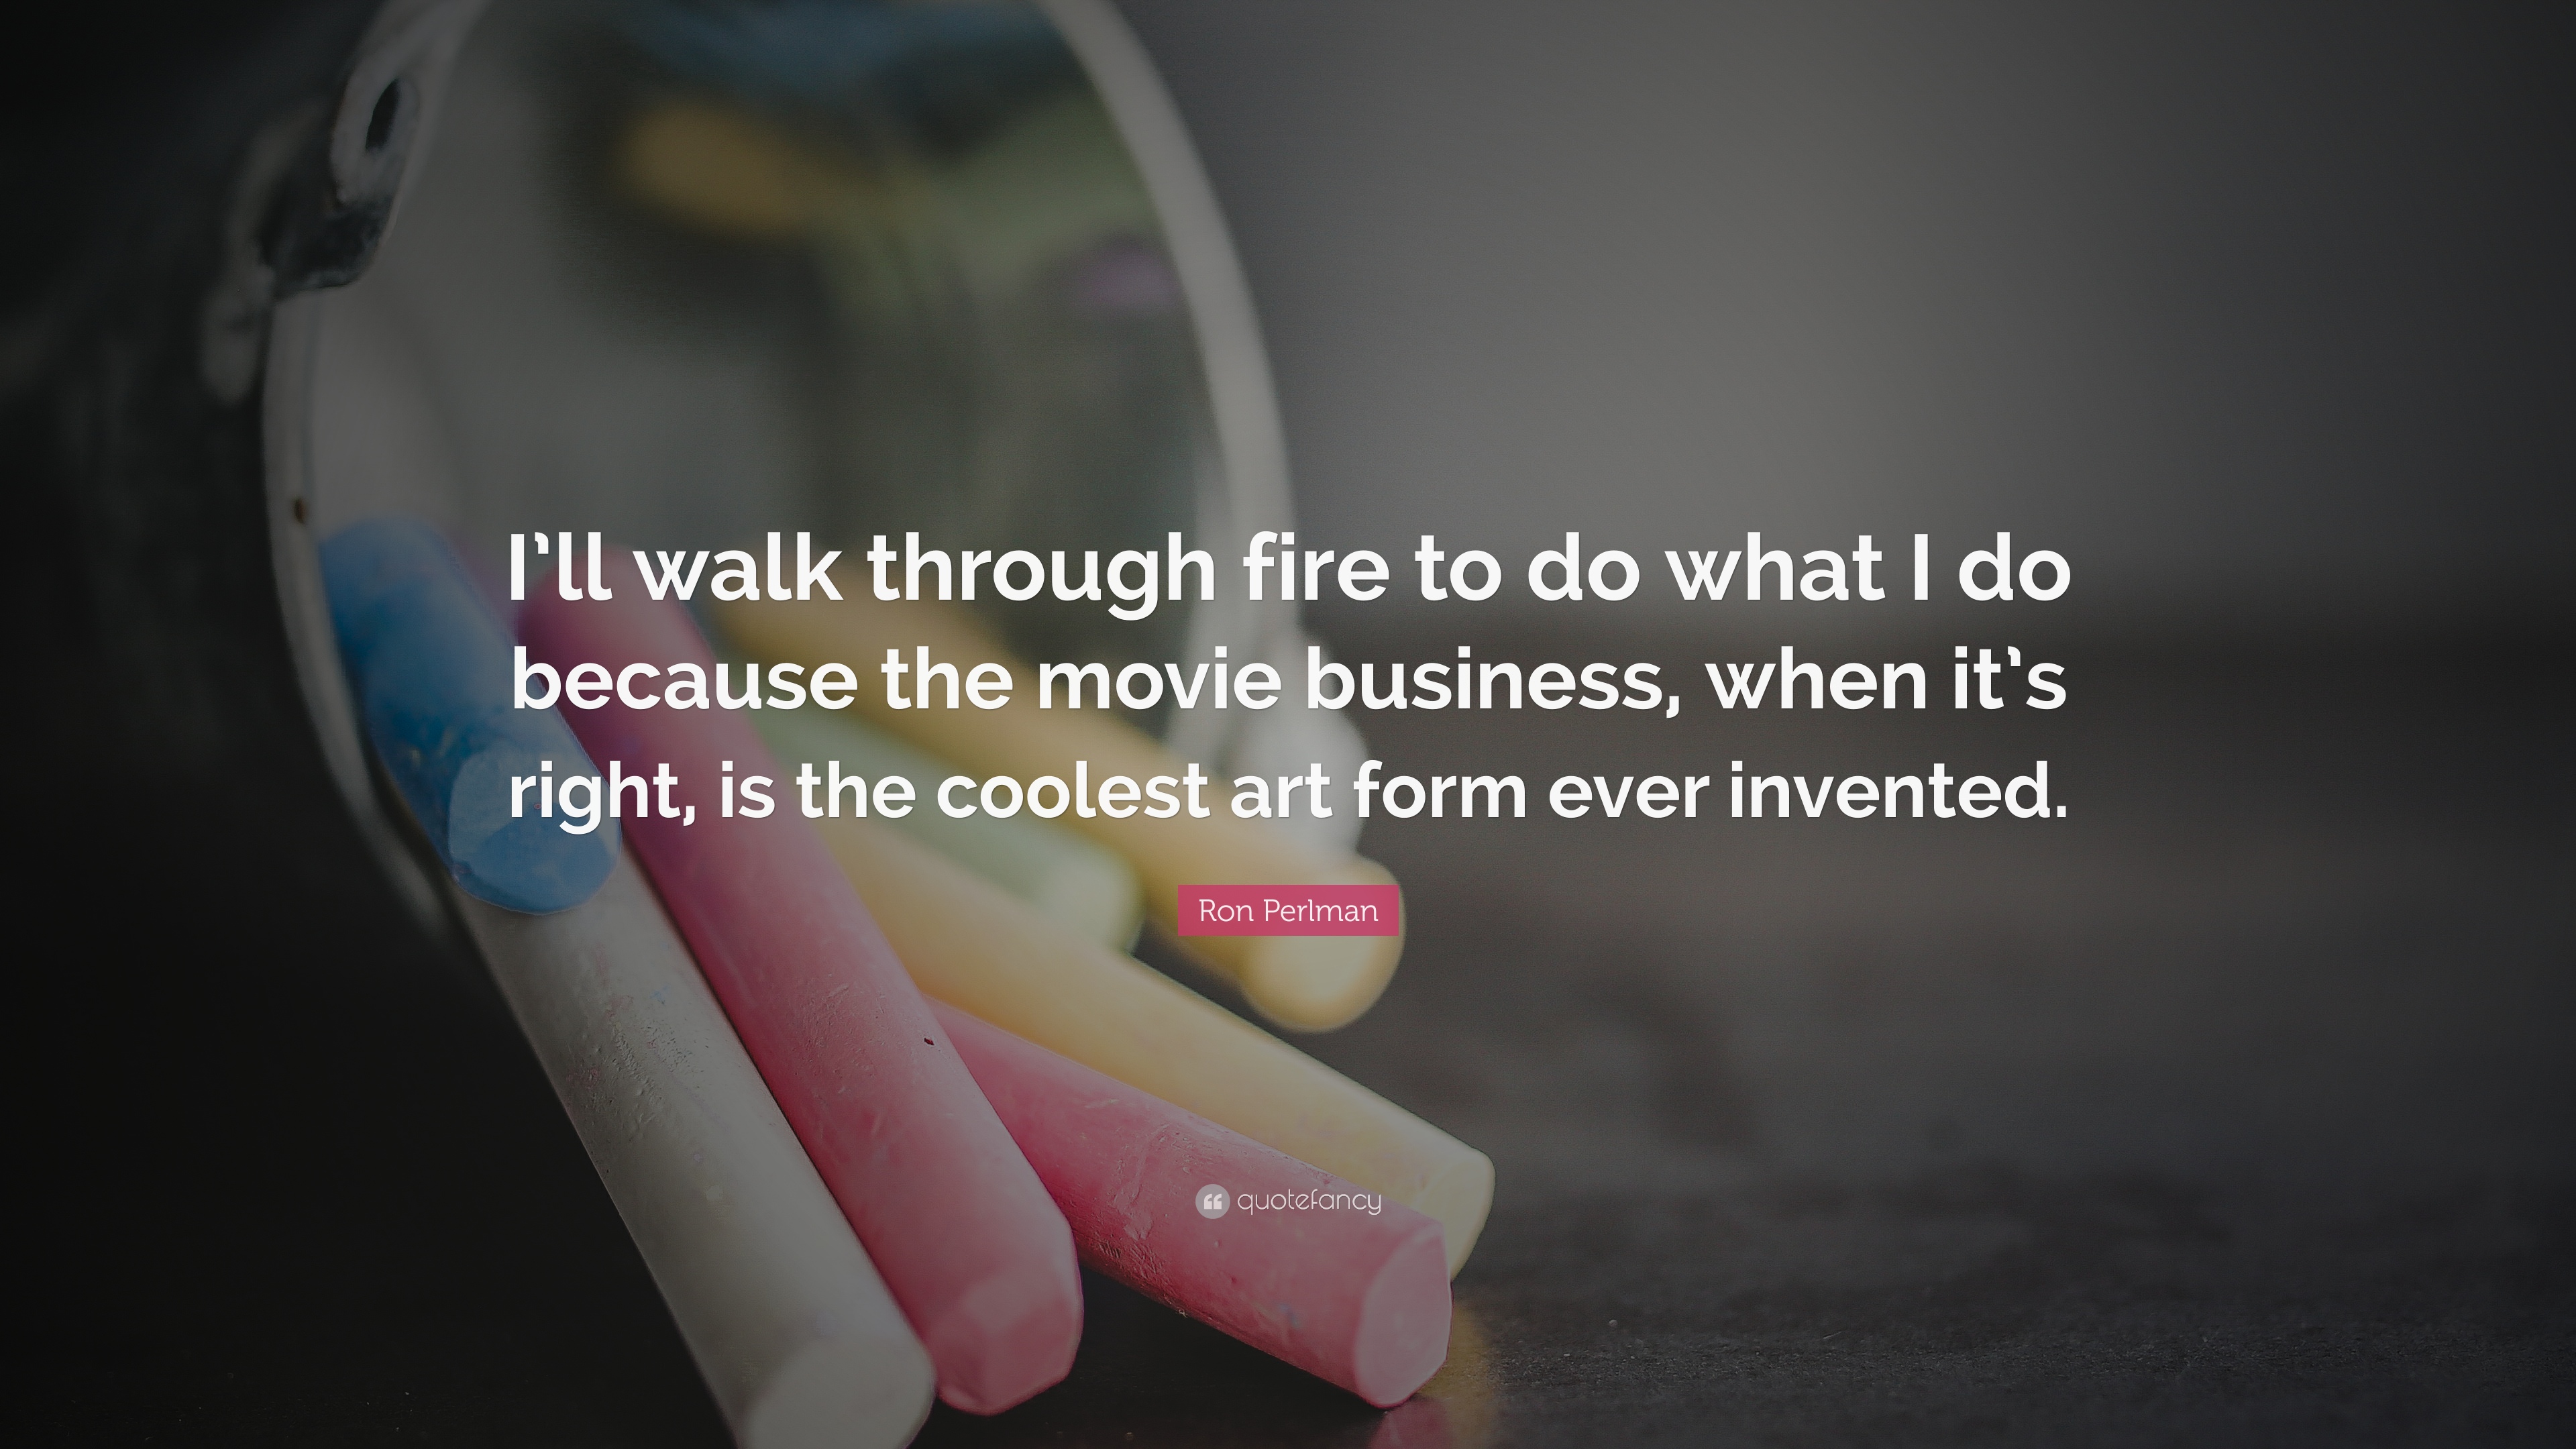 Ron Perlman Quote: “I'll walk through fire to do what I do because